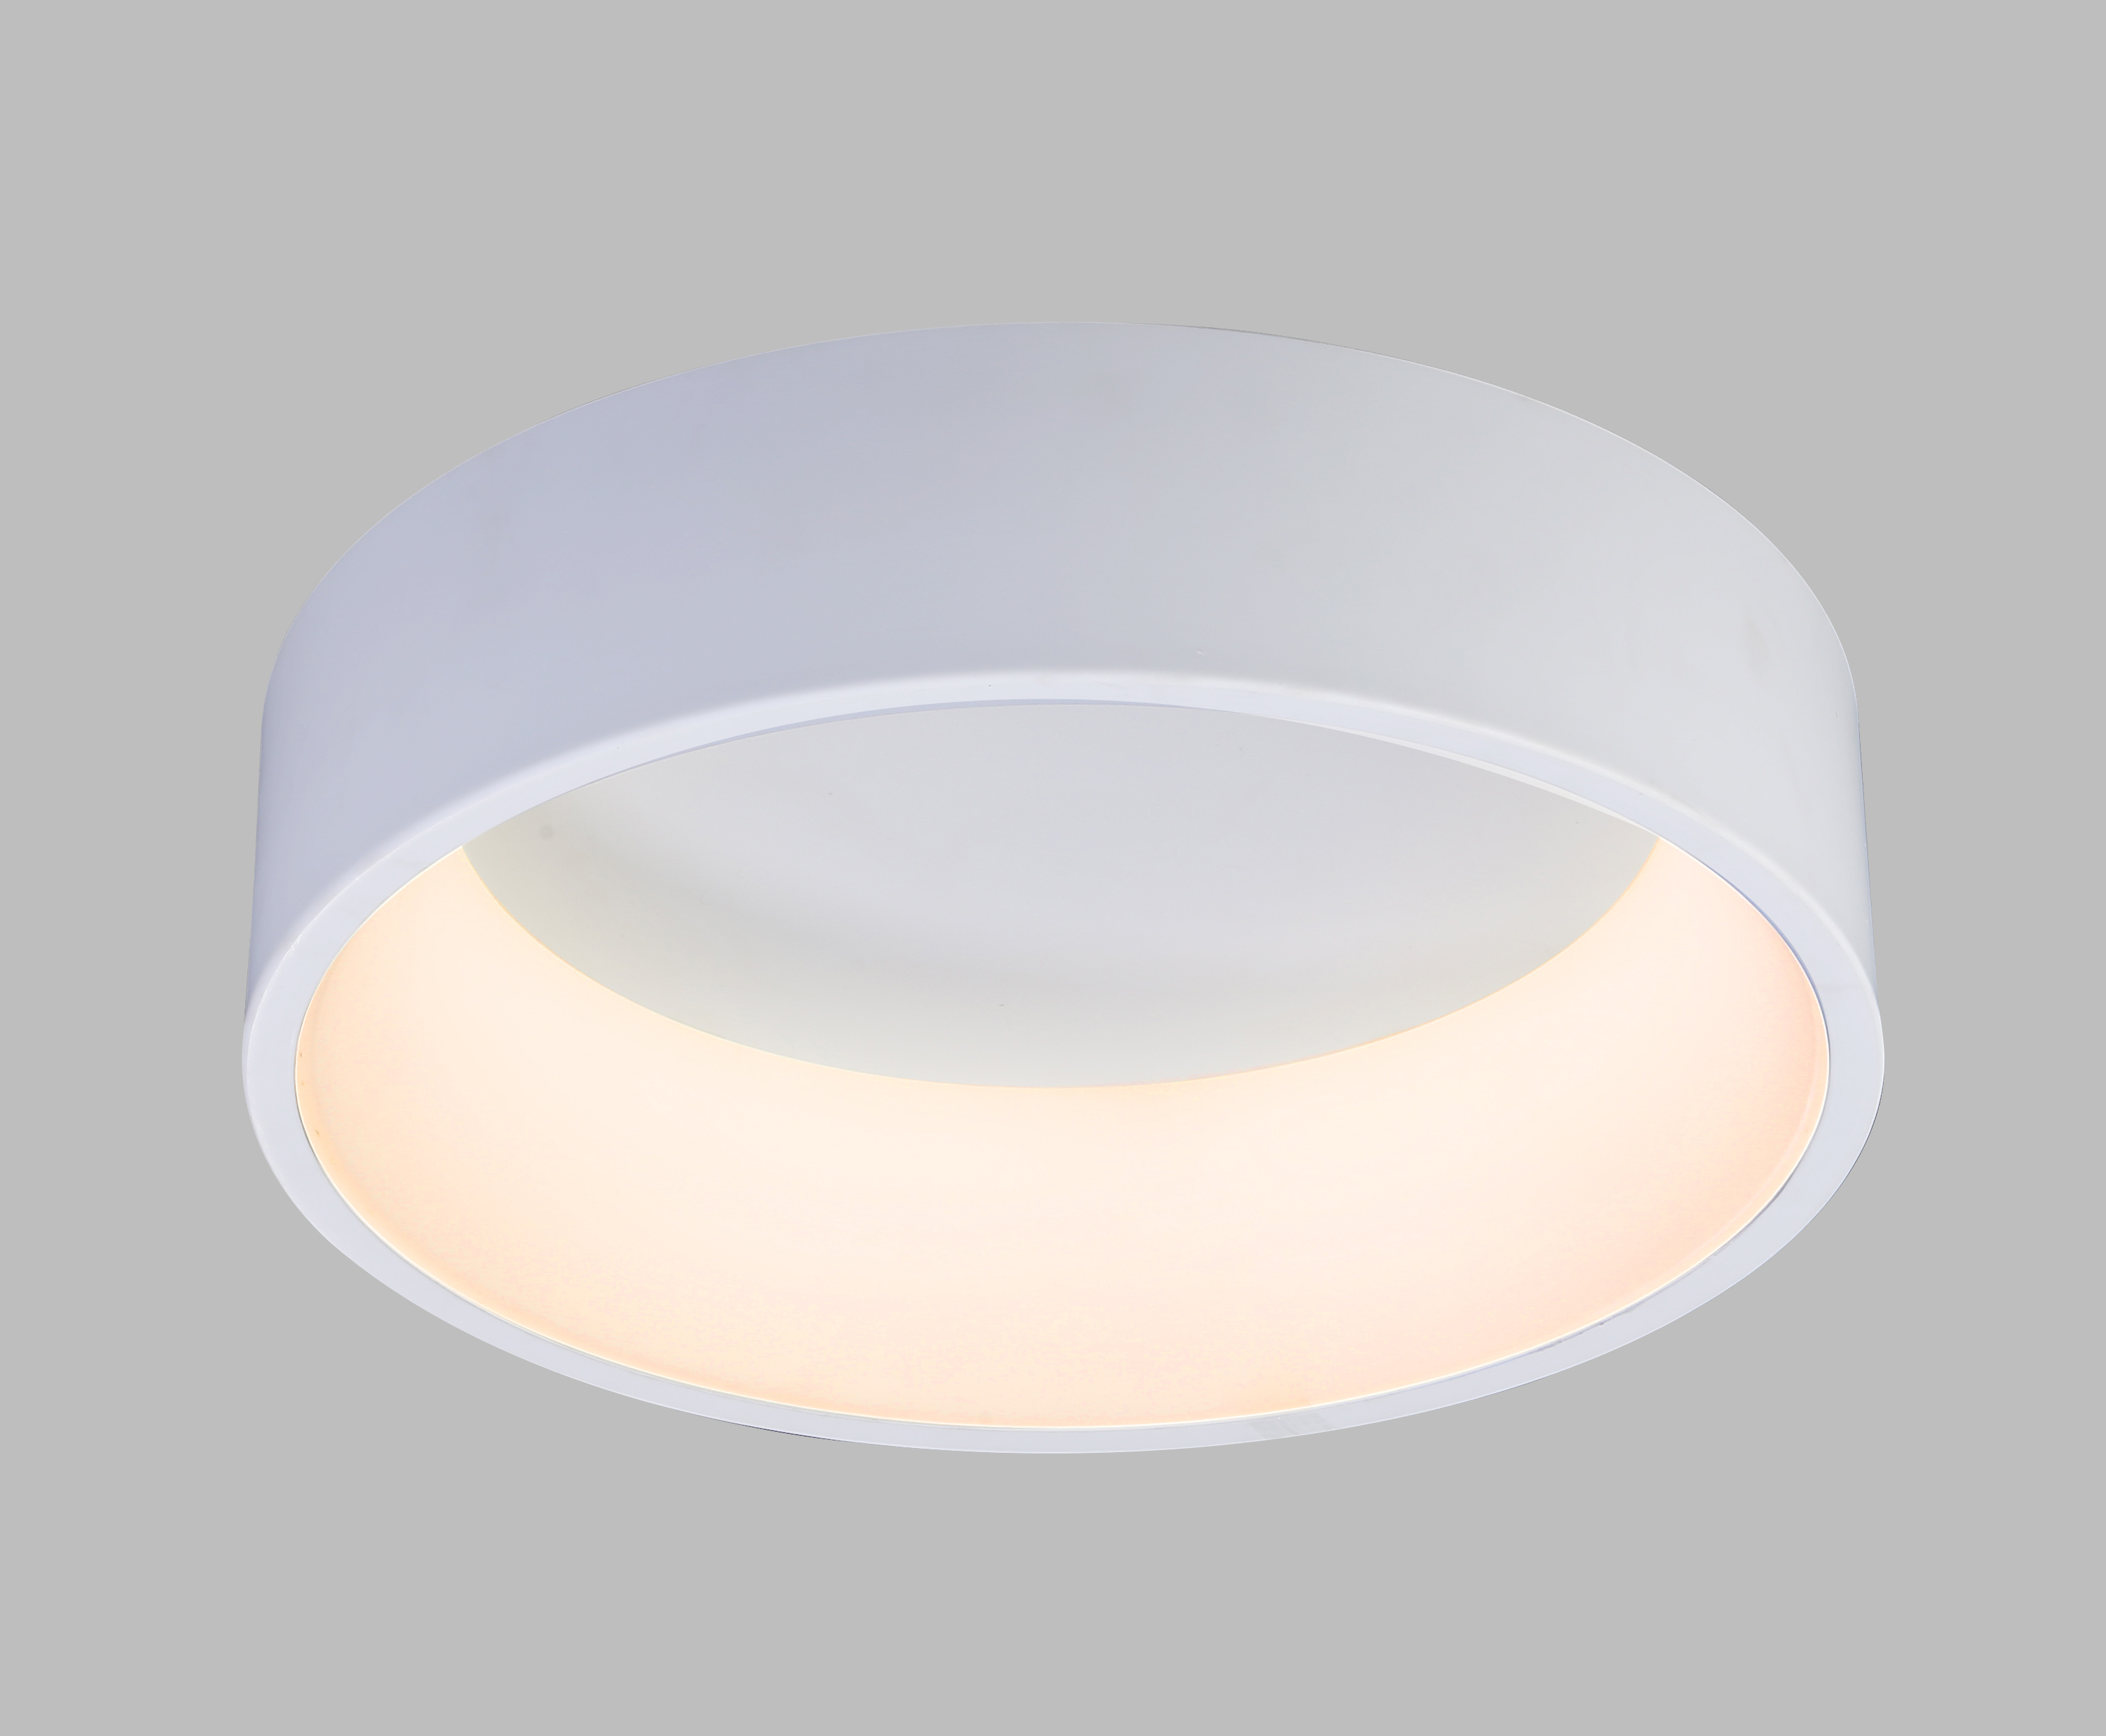 MX3380-L is bright and it is a simple and highly individual ceiling